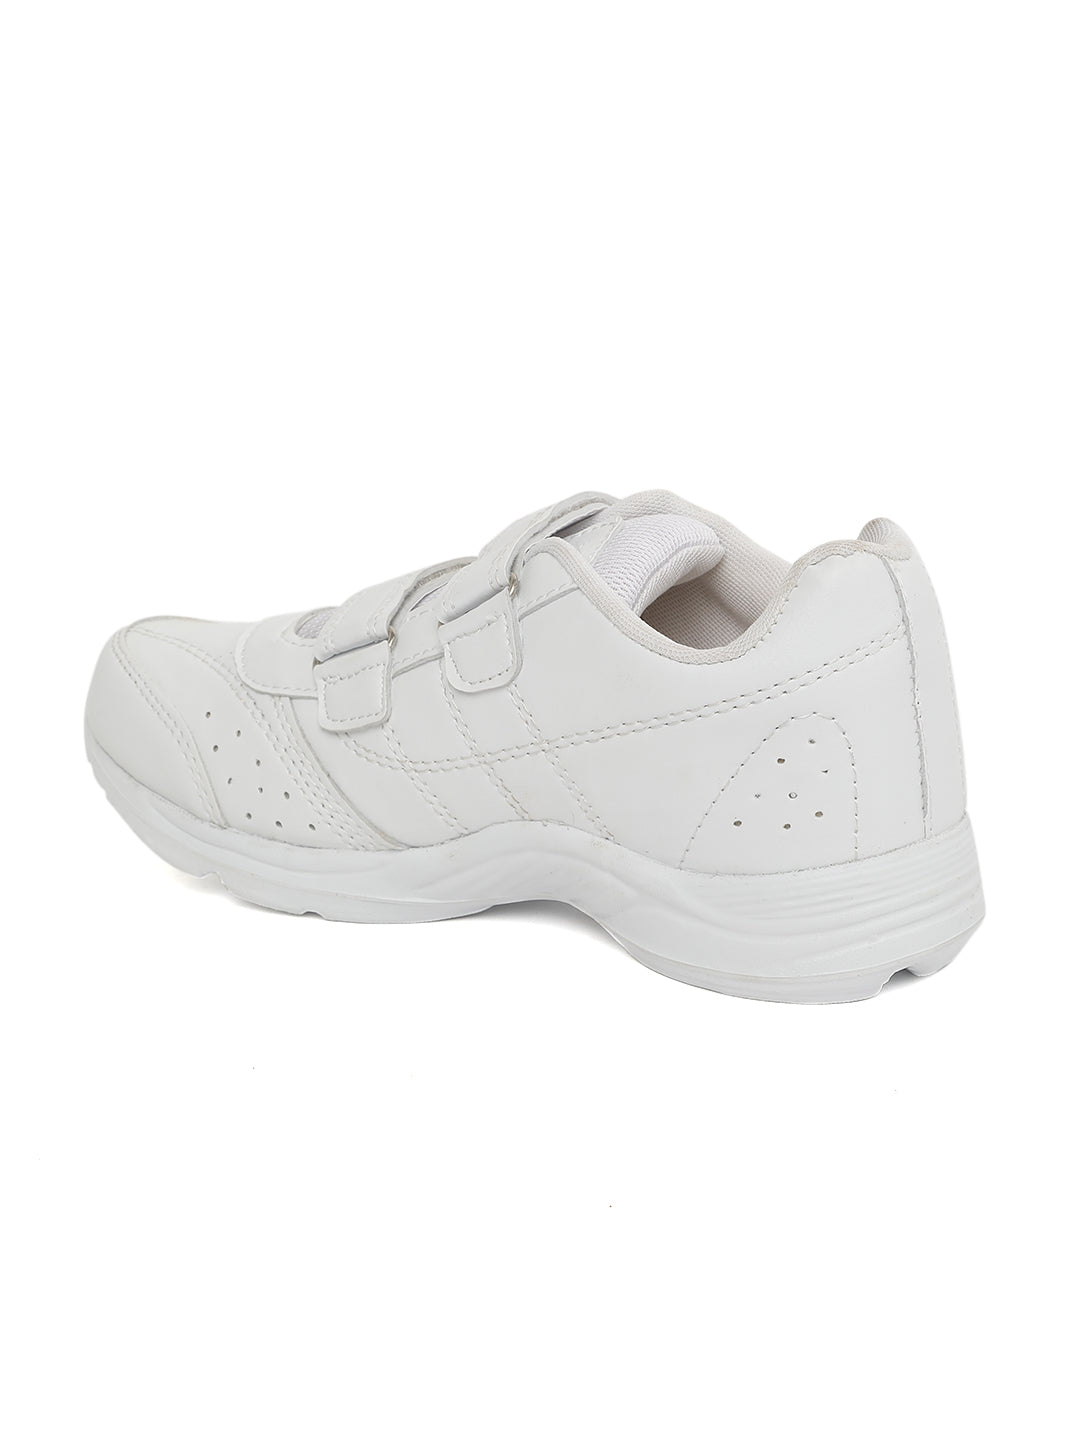 Paragon  R10600B Kids Formal School Shoes | Comfortable Cushioned Soles | School Shoes for Boys &amp; Girls